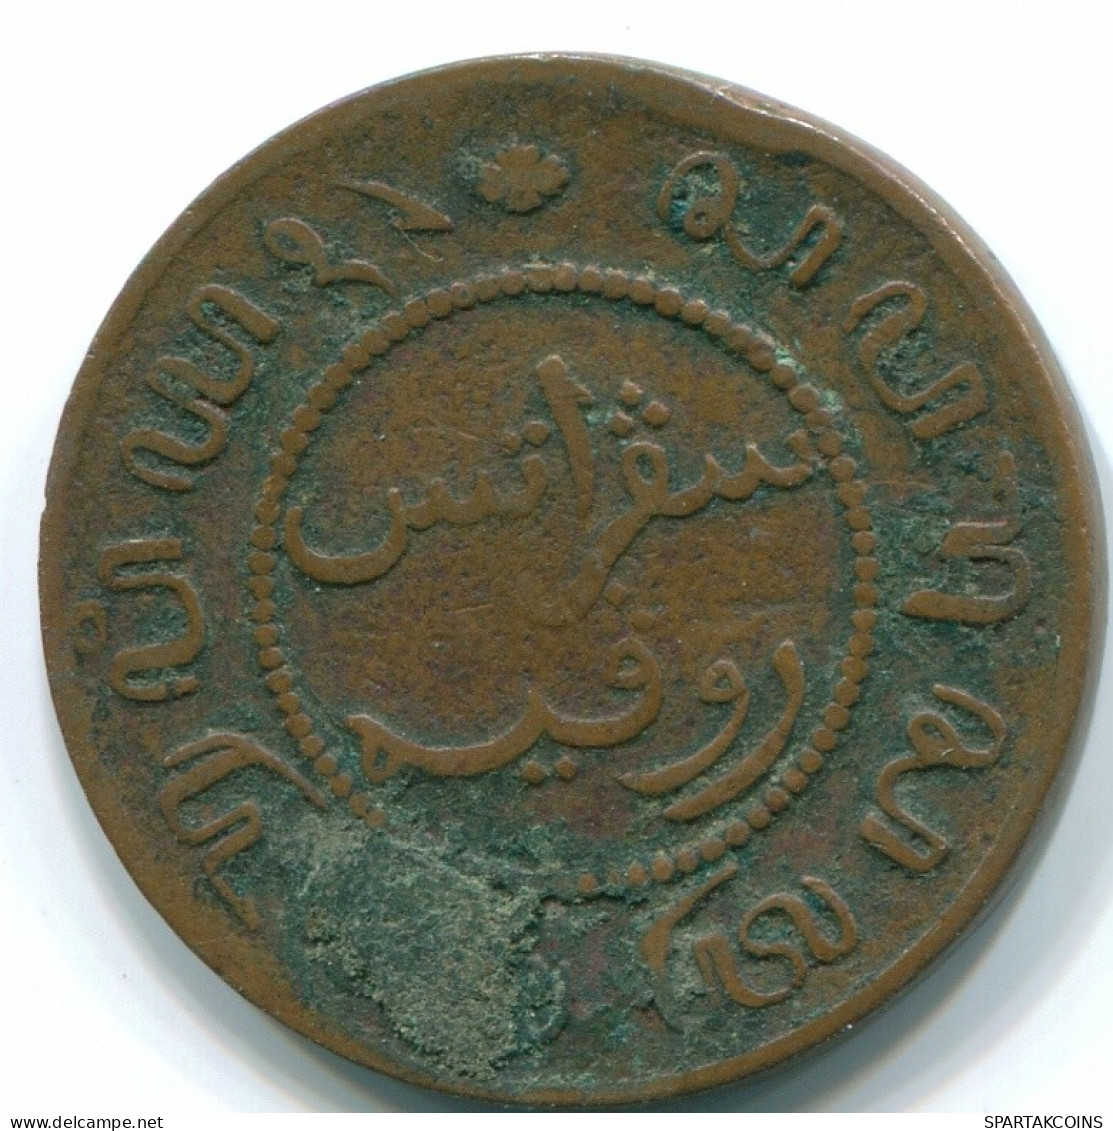 1 CENT 1856 NETHERLANDS EAST INDIES INDONESIA Copper Colonial Coin #S10017.U.A - Indes Néerlandaises